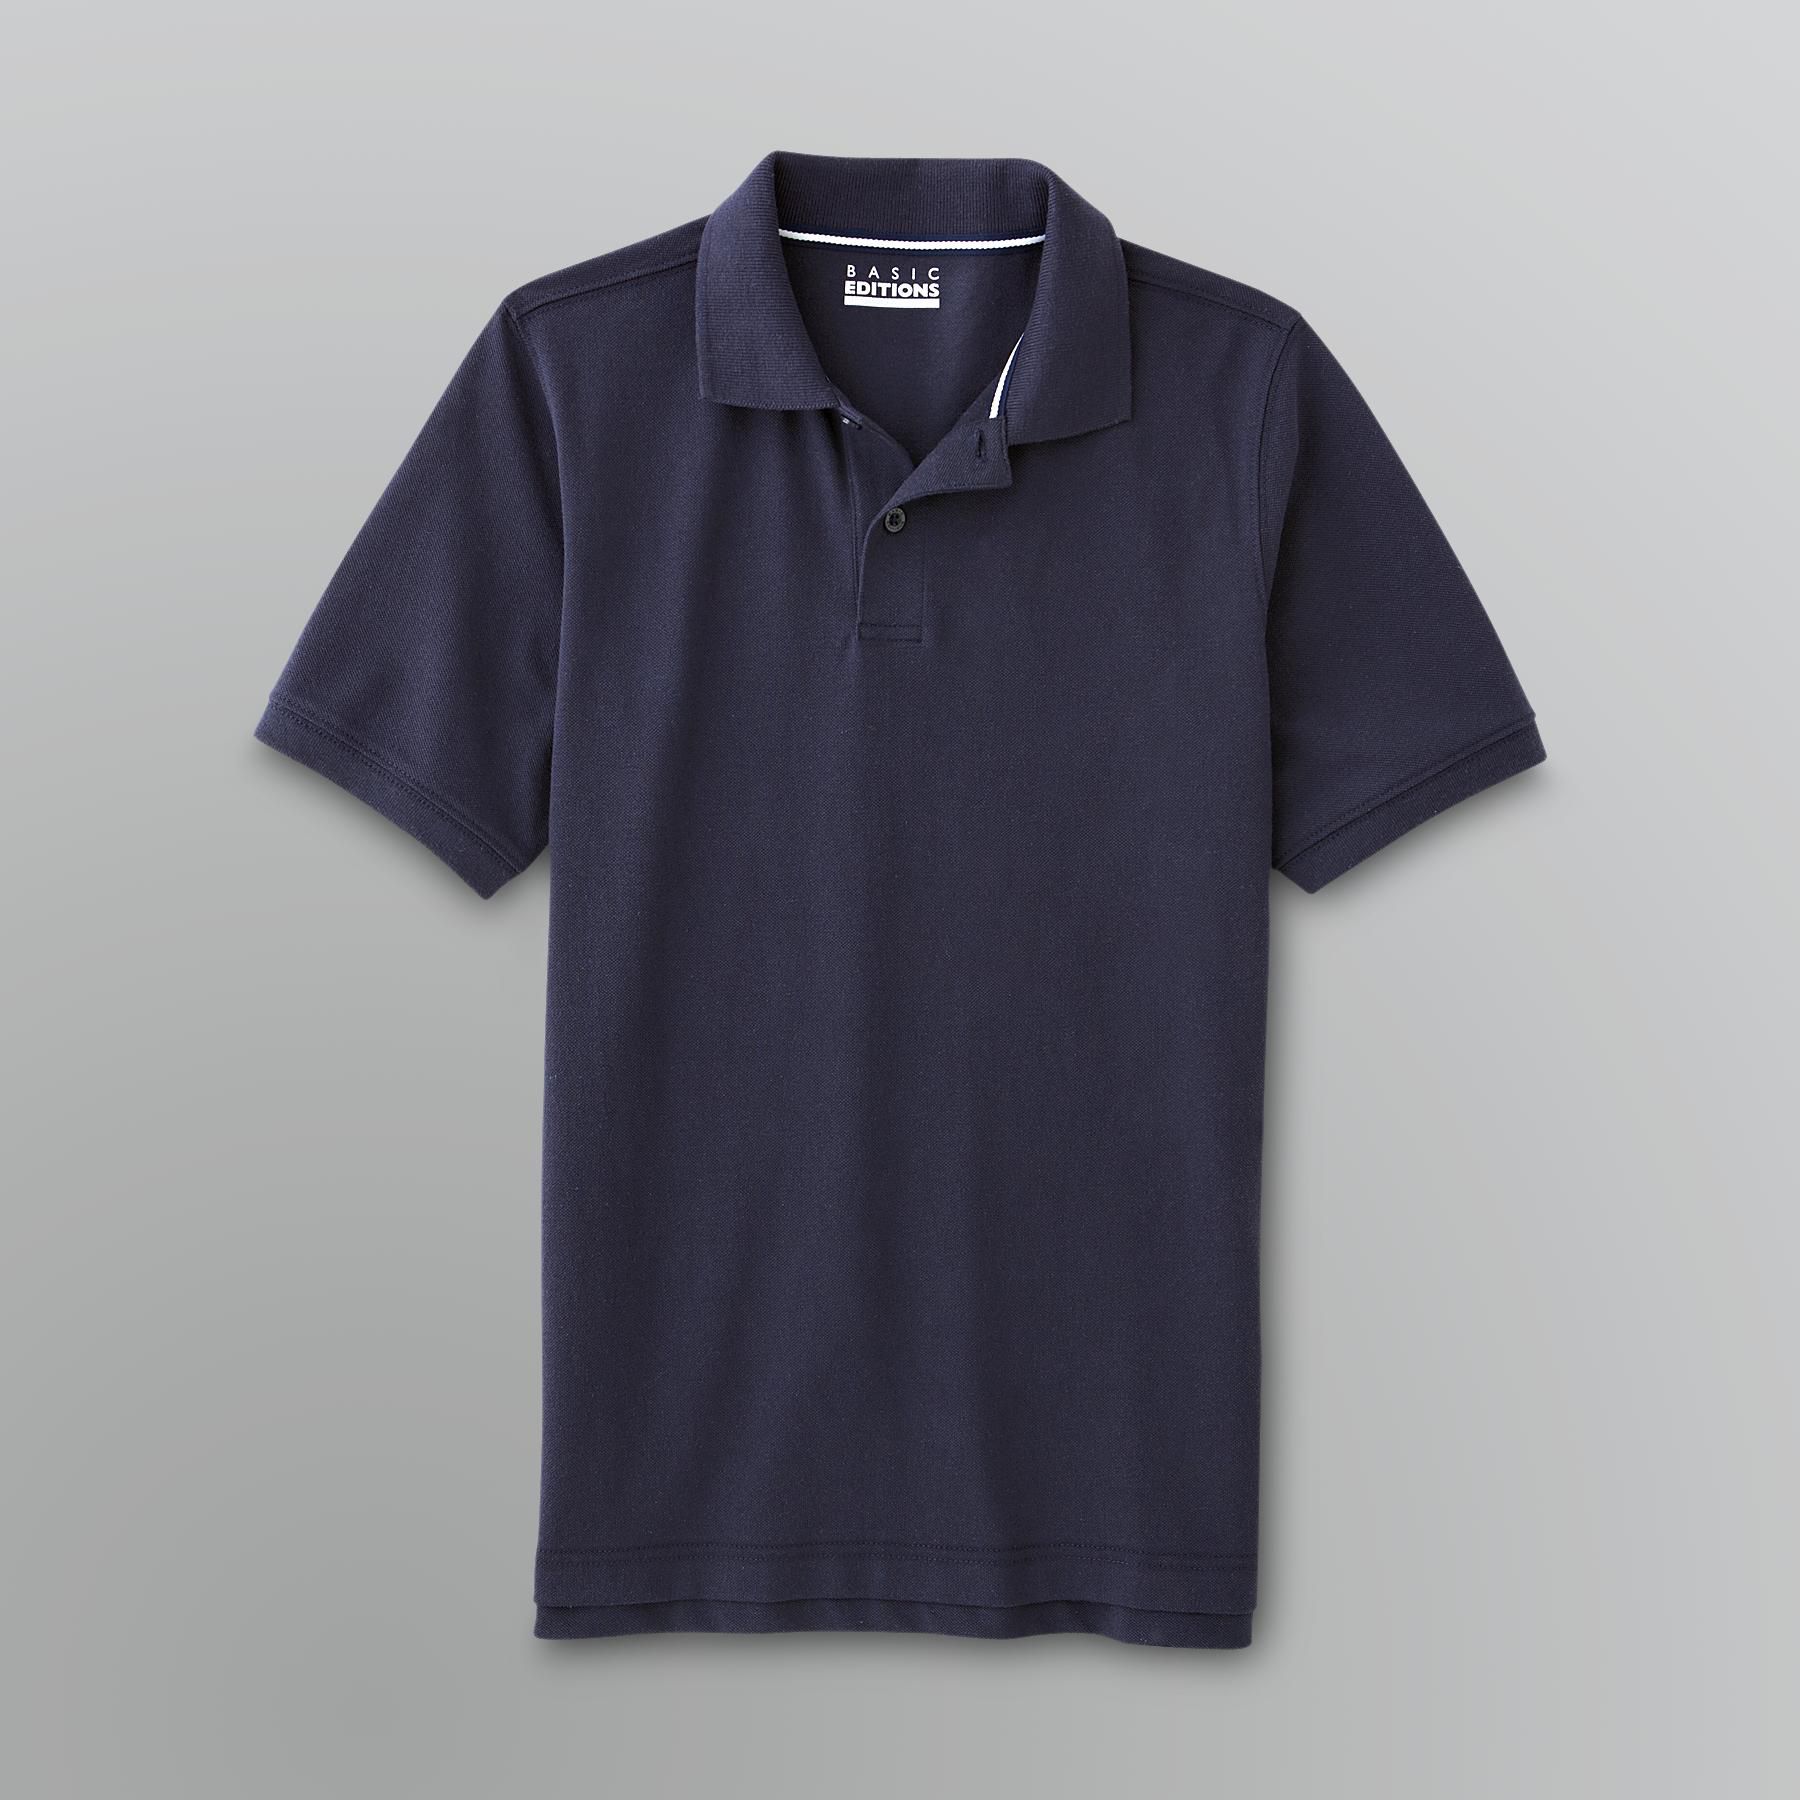 Basic Editions Boy's Pique Solid Polo Shirt